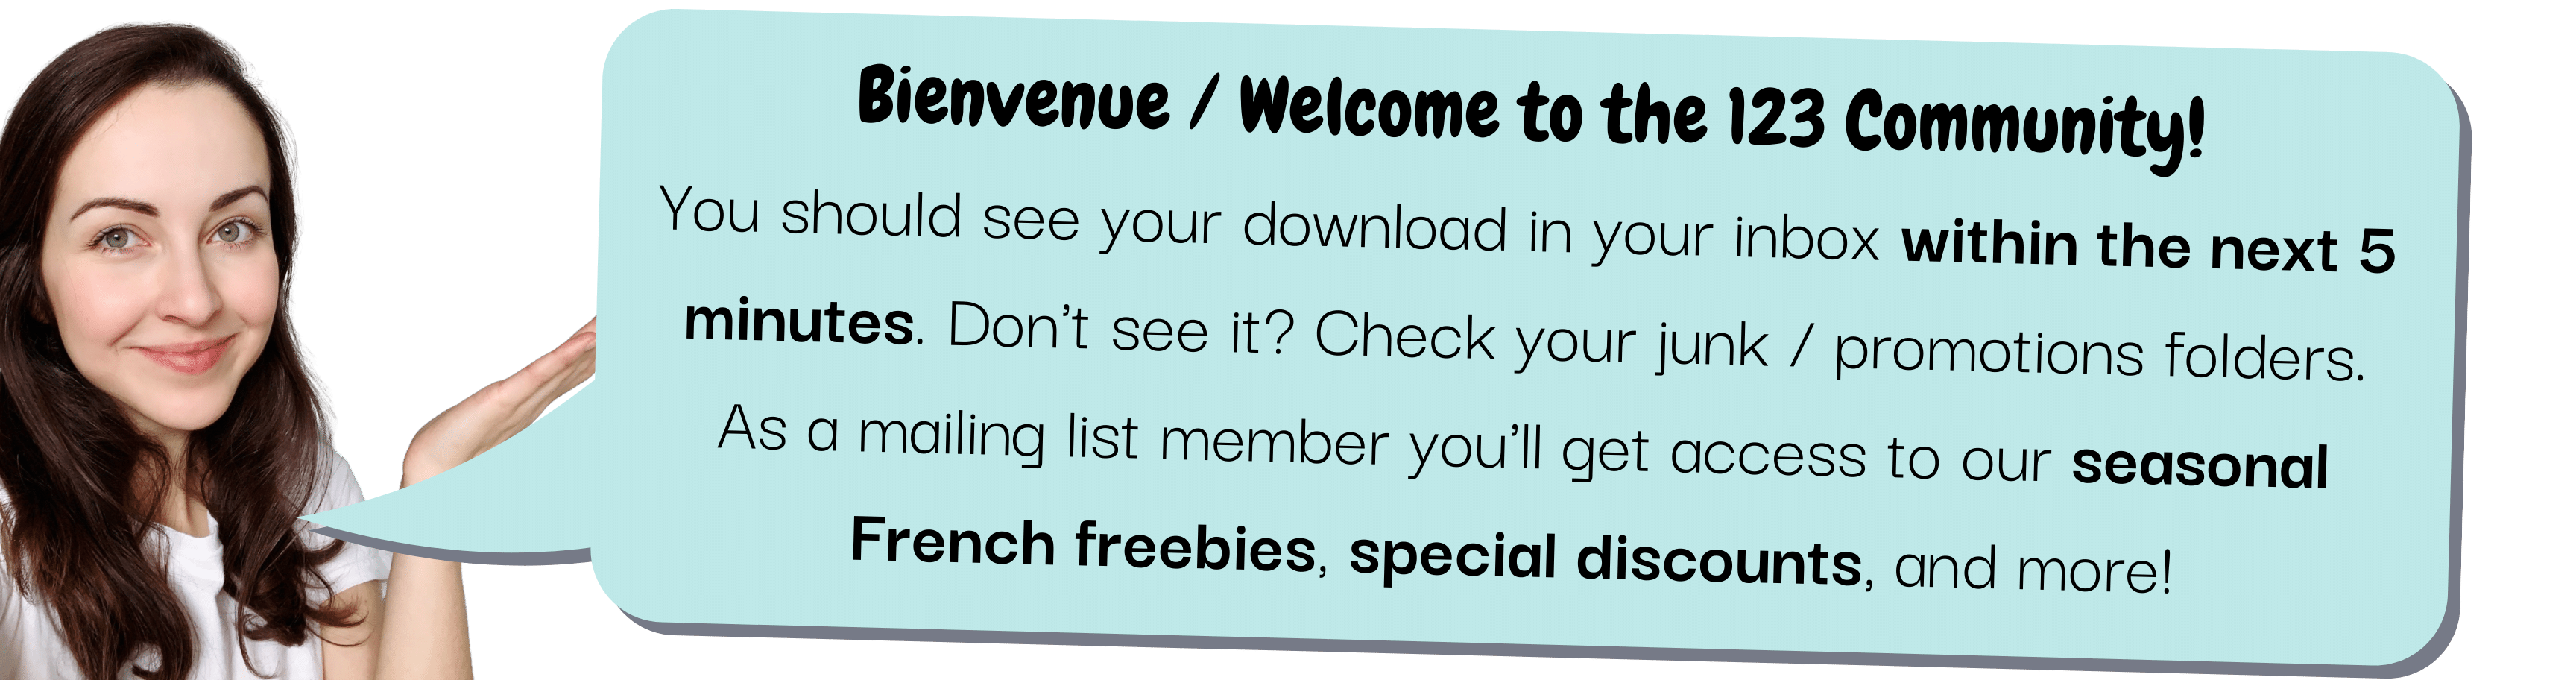 Bienvenue / Welcome to the 123 Community! You should see your download in your inbox within the next 5 minutes. Don't see it? Check your junk / promotions folders. As a mailing list member you'll get access to our seasonal French freebies, special discounts, and more!